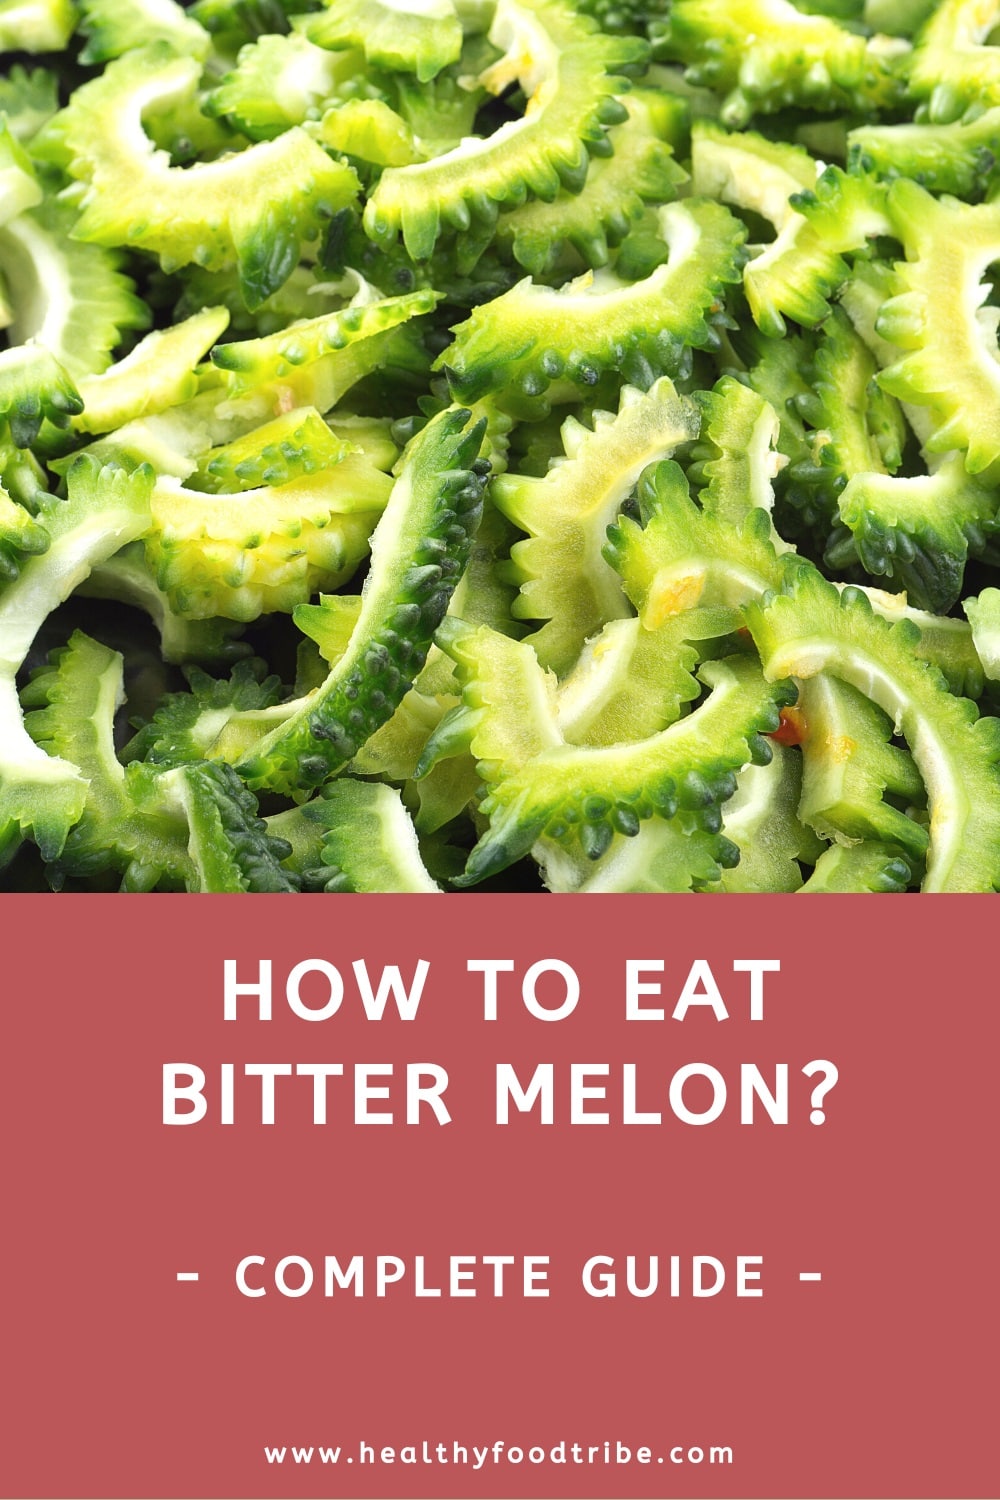 How to eat bitter melon (complete guide)